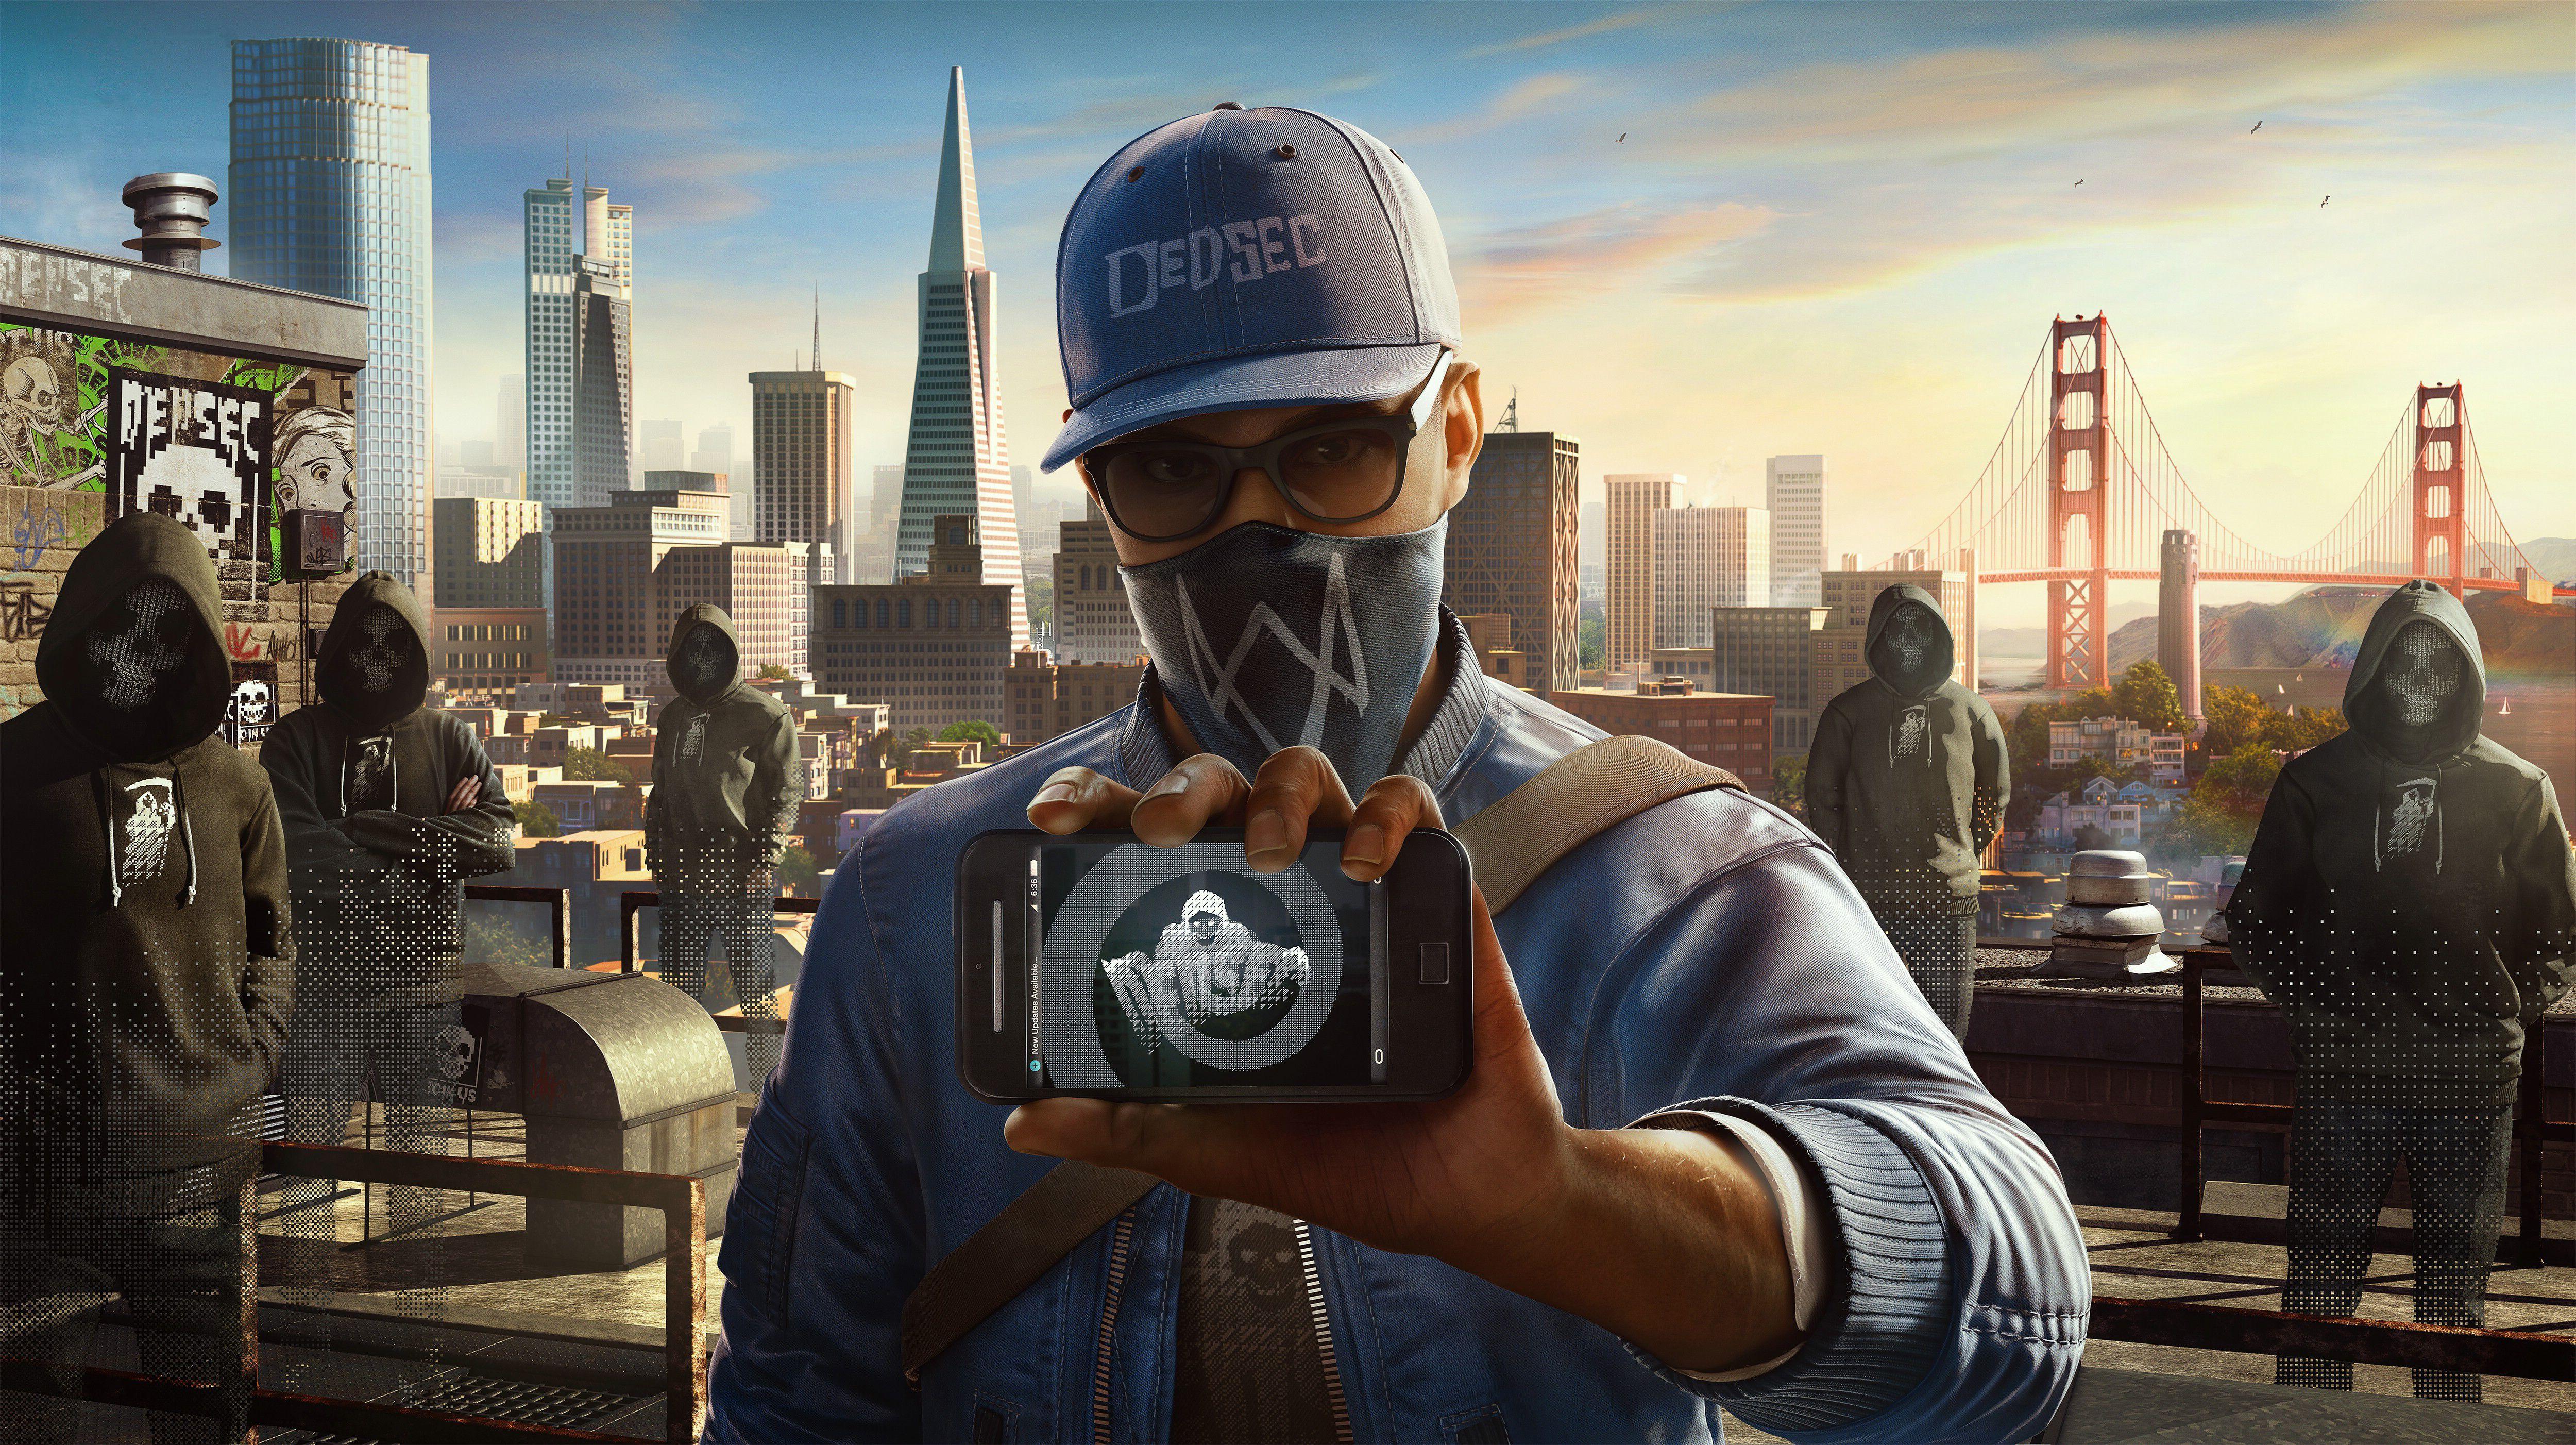 160+ Watch Dogs 2 HD Wallpapers and Backgrounds